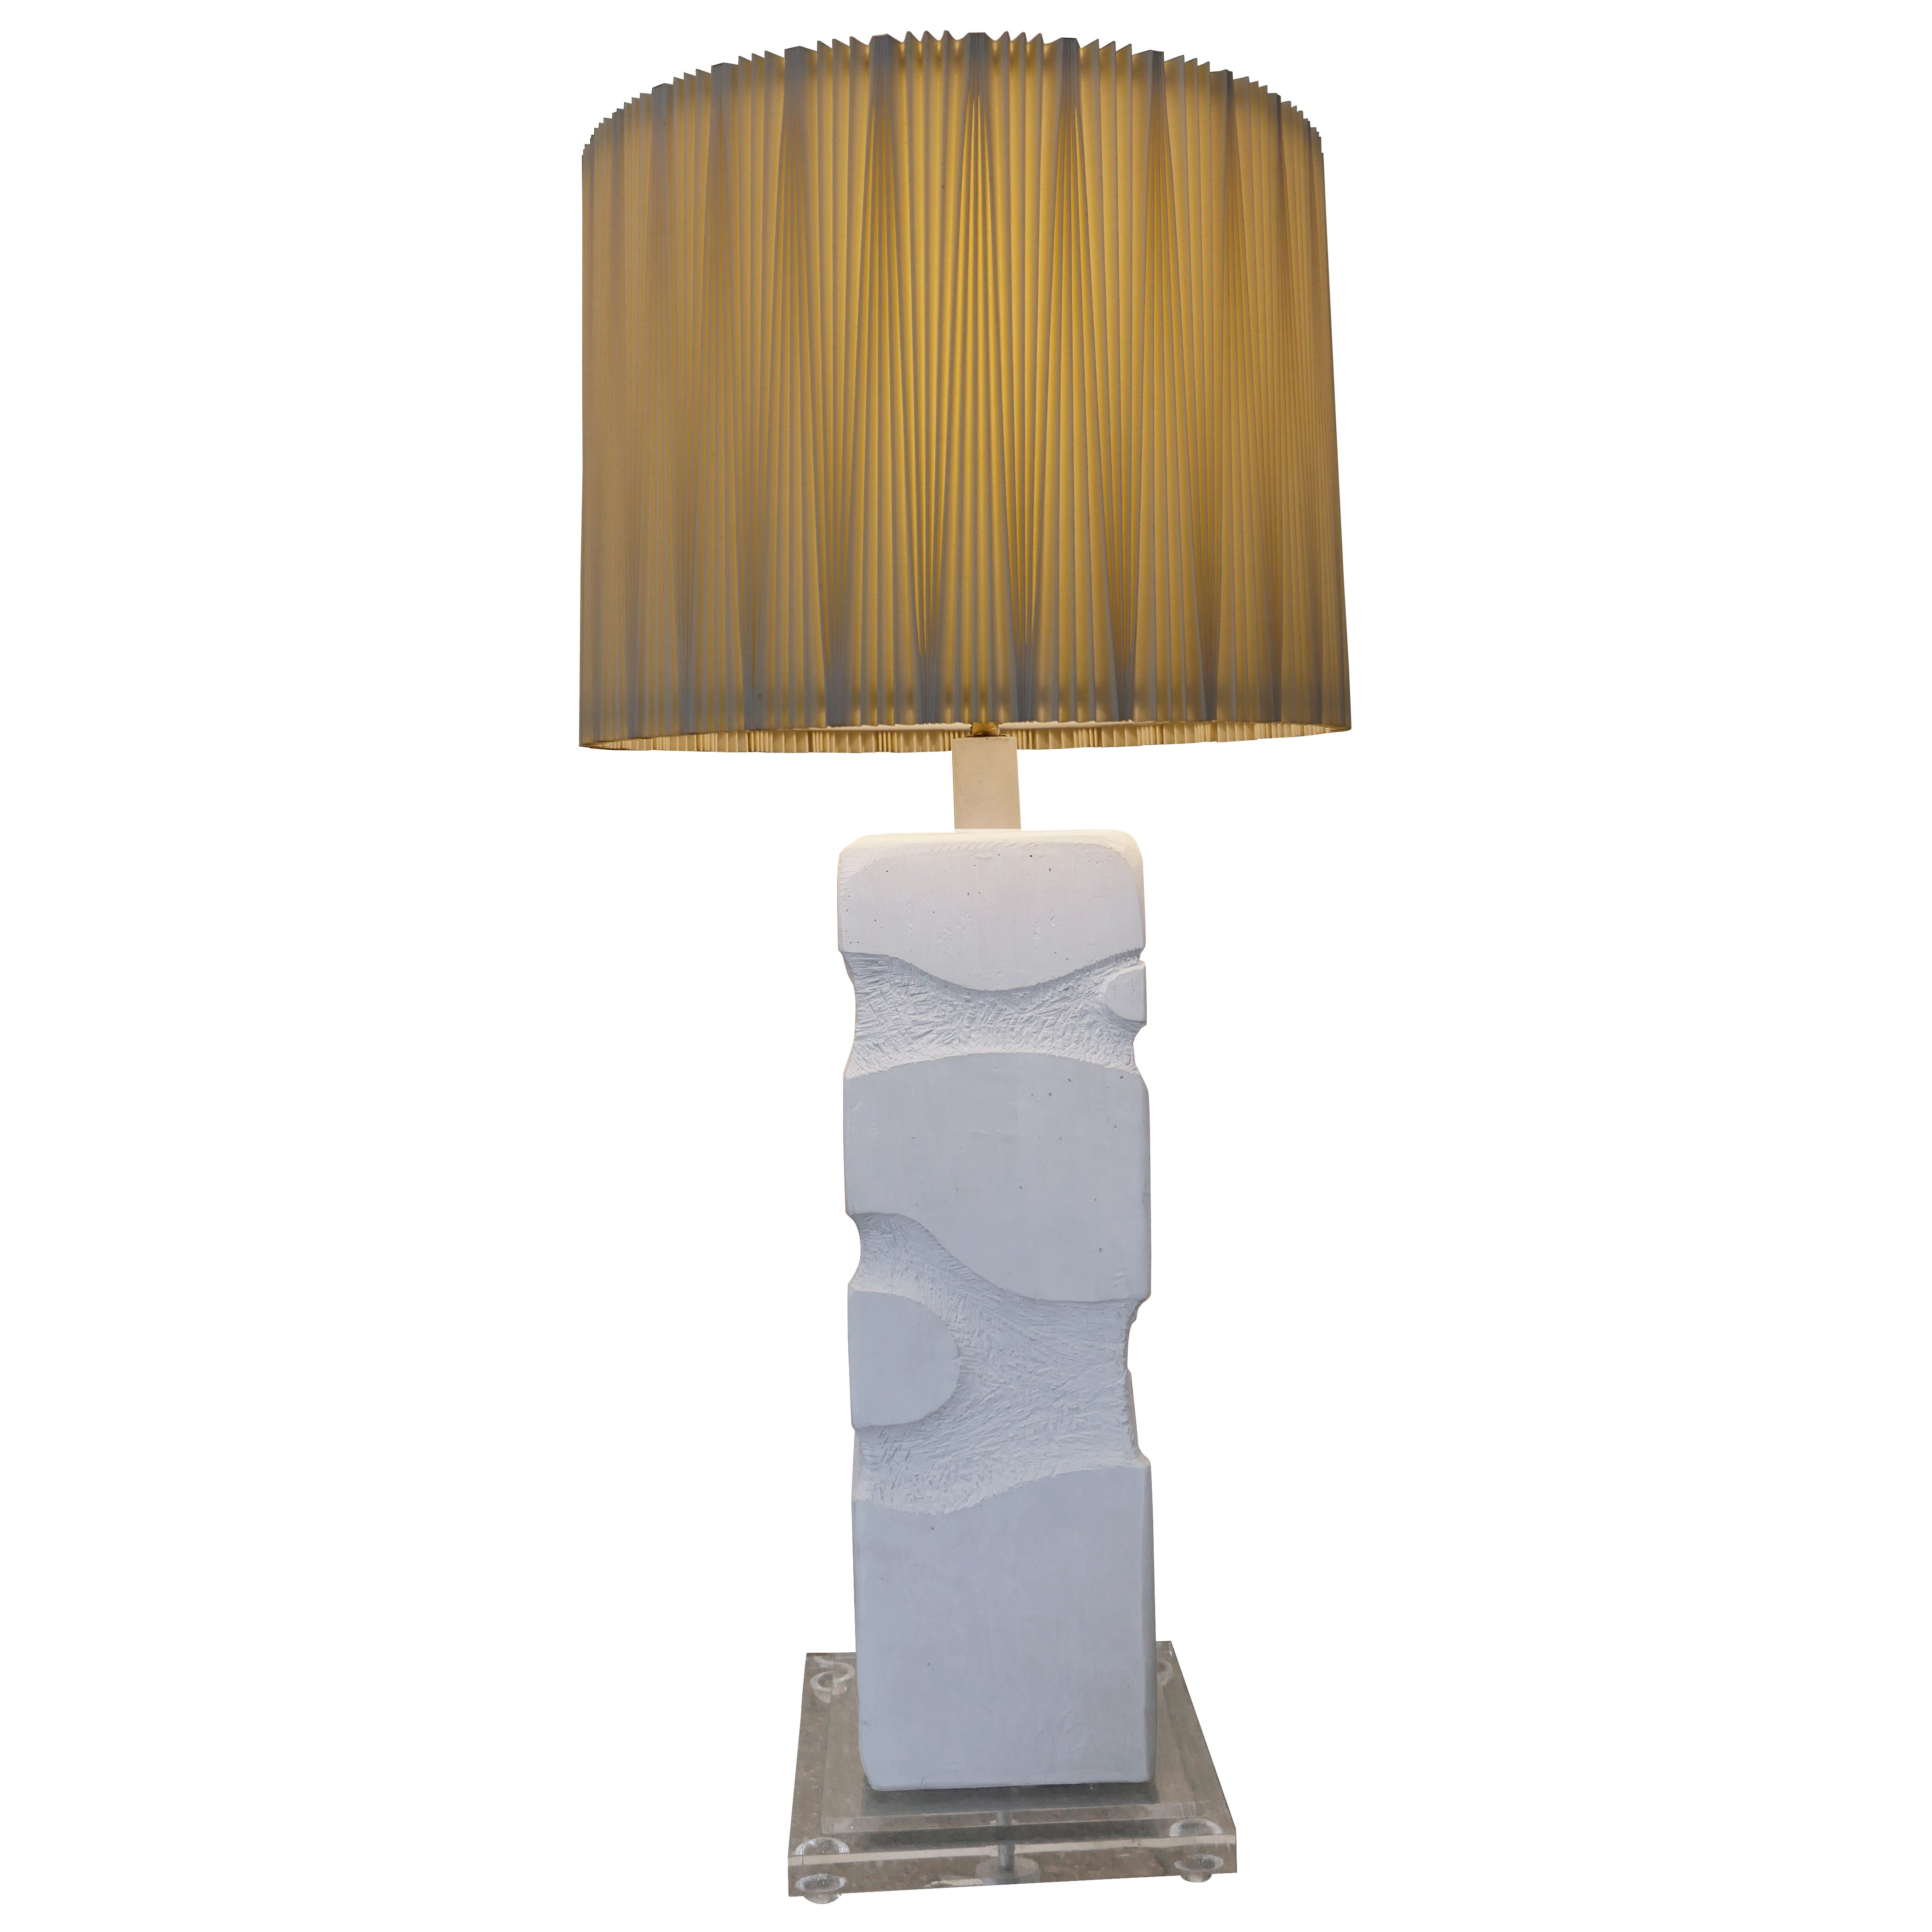 Cool postmodern 1987 table or floor lamp, with a custom made cylindrical pleated shade by Casual Lamps of California. The lamp has a square lucite base and is in great working condition. 